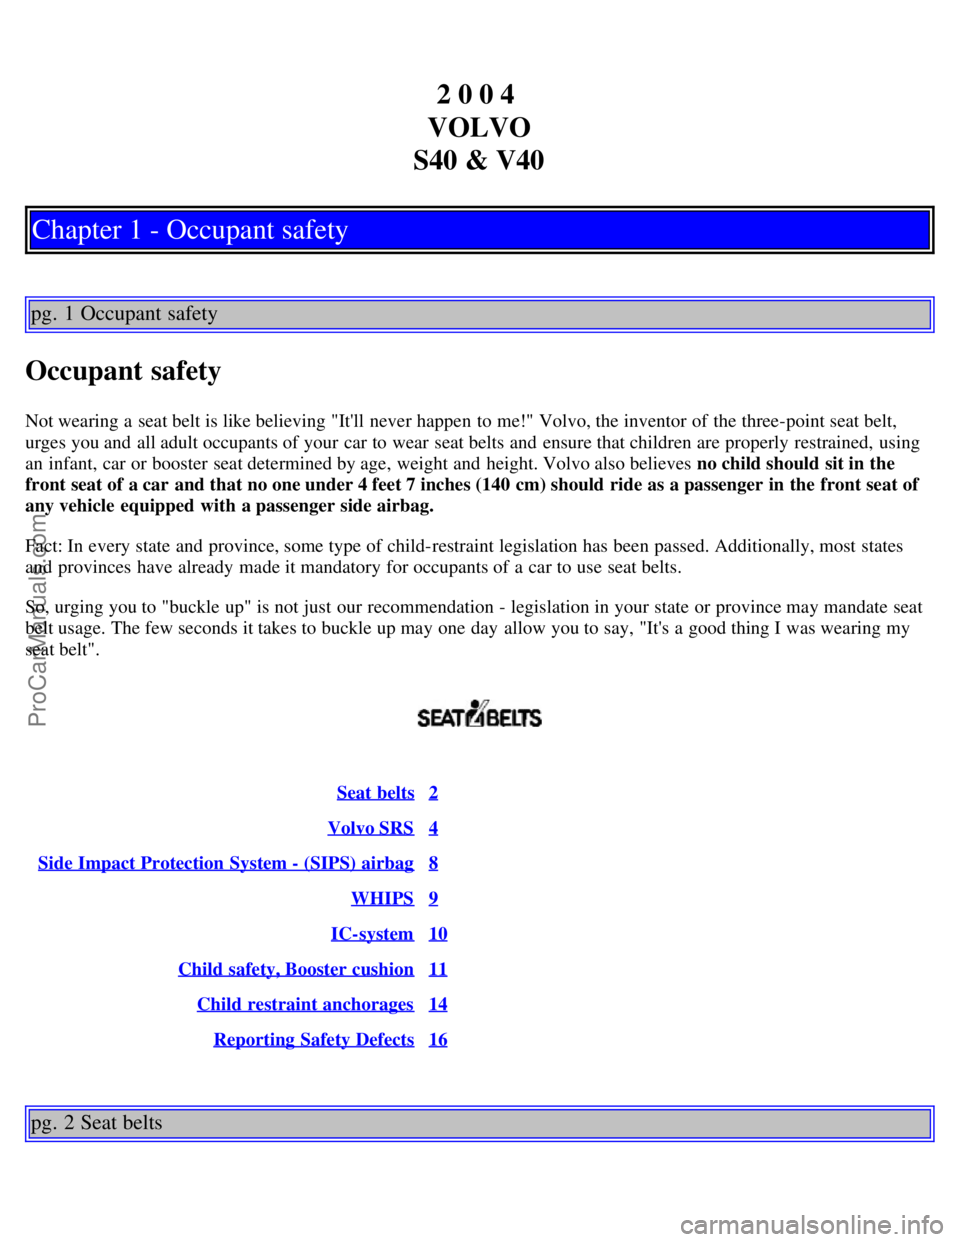 VOLVO S40 2004  Owners Manual 2 0 0 4 
VOLVO
S40 & V40
Chapter 1 - Occupant safety
pg. 1 Occupant safety
Occupant safety
Not wearing a  seat belt is like believing "Itll  never happen to me!" Volvo, the inventor of the three-poin